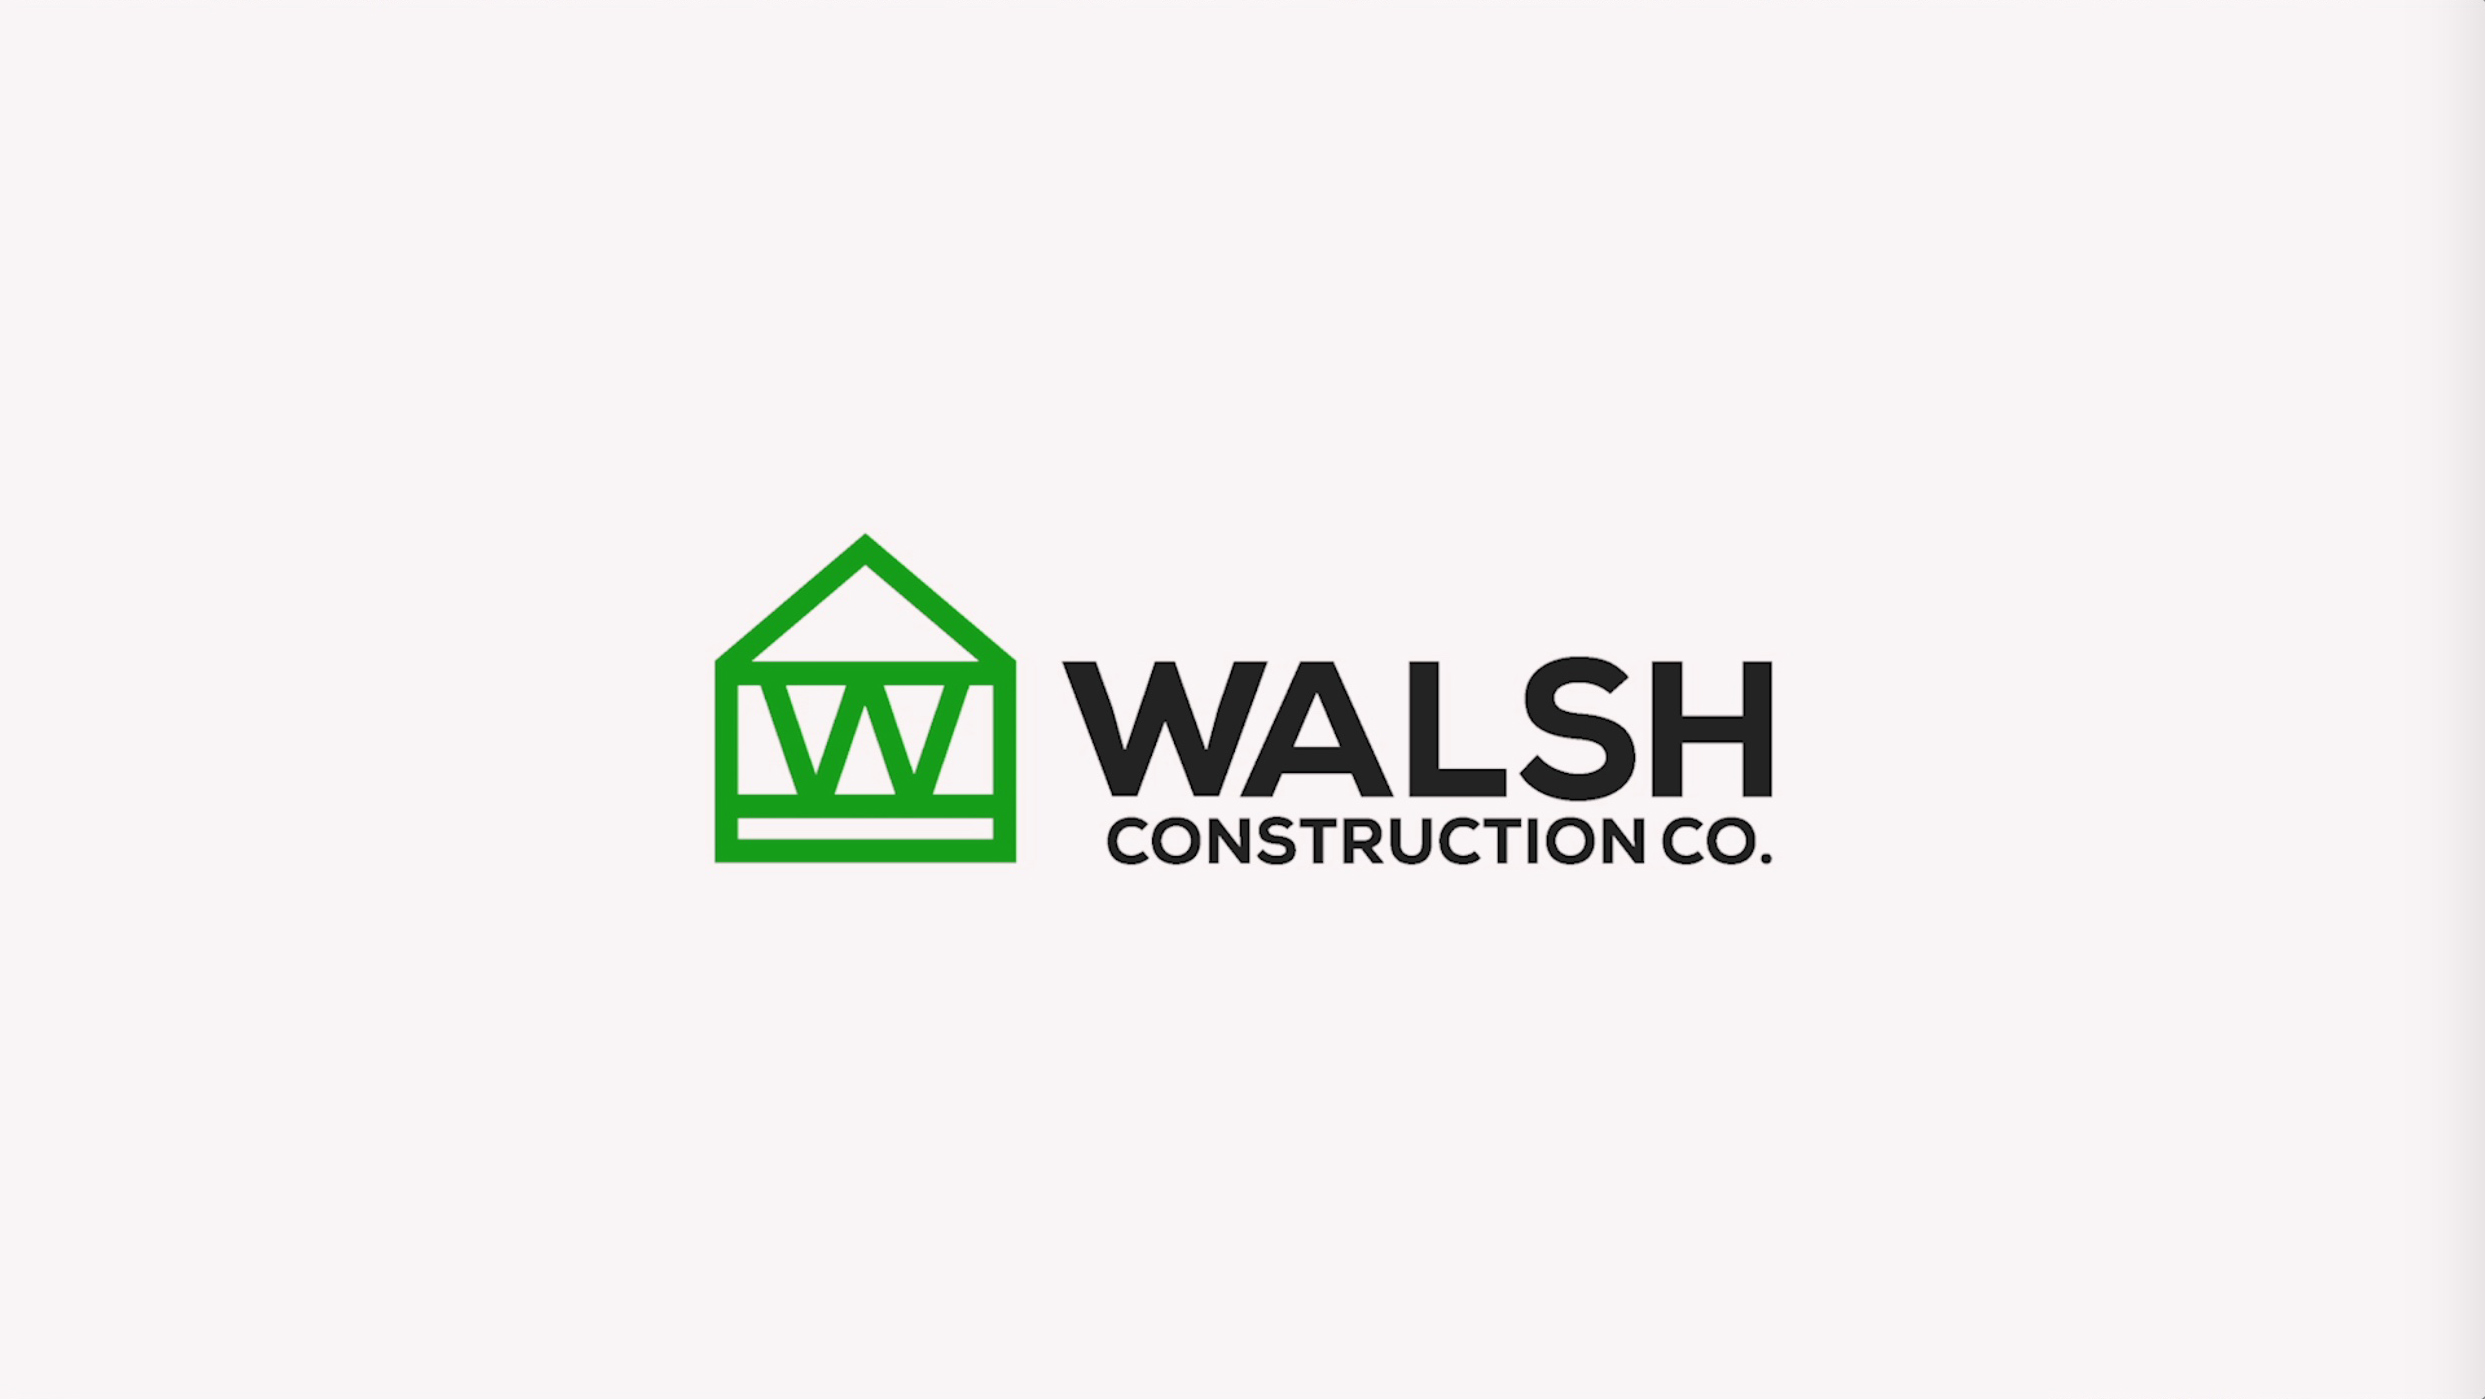 Walsh Construction Marketing Video Highlighting The Collaborative People At The Company